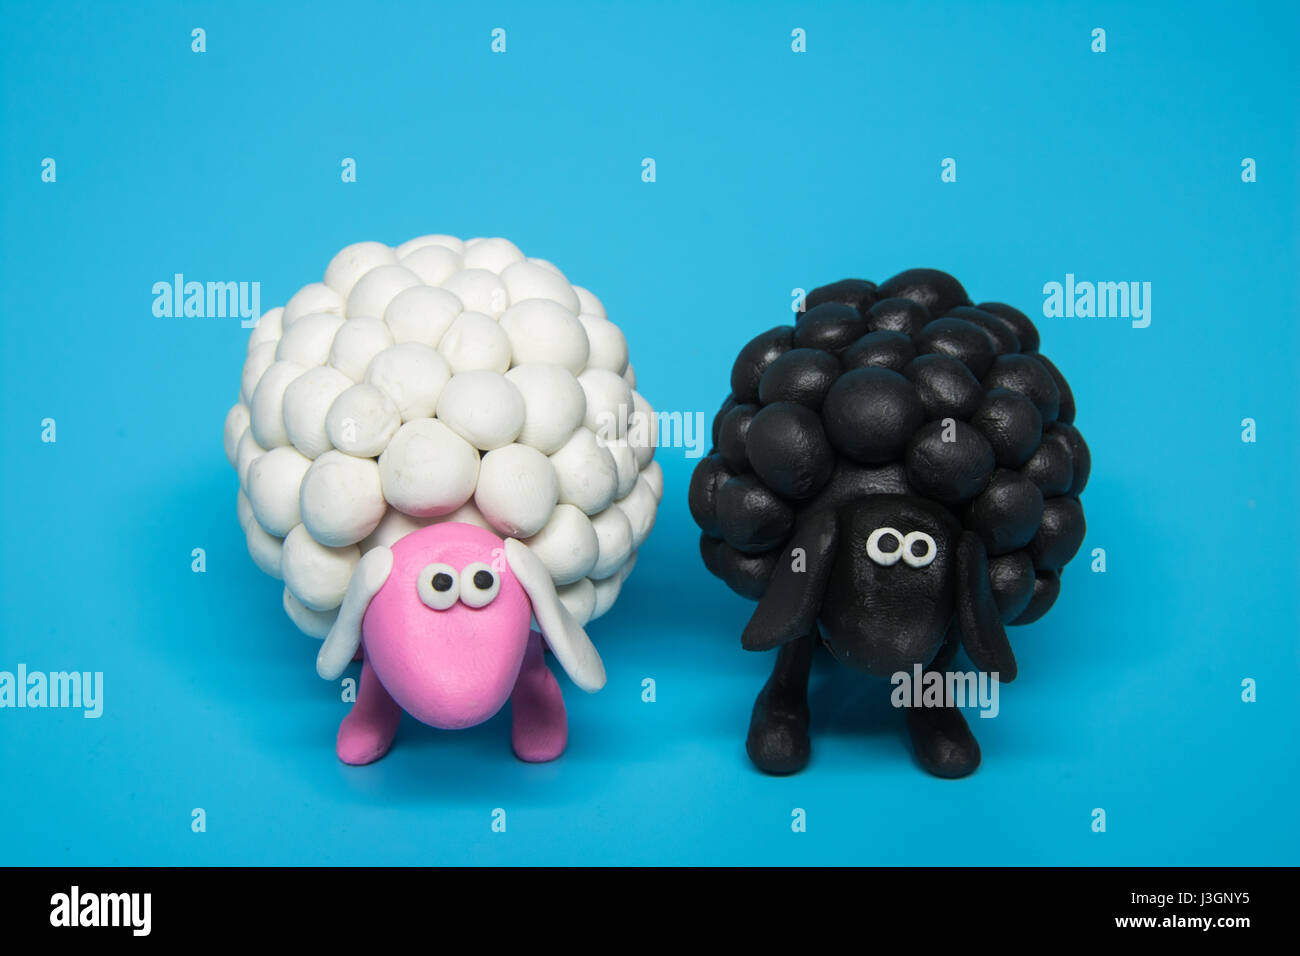 Concept - A black and a white polymer clay sheep placed next to each other Stock Photo